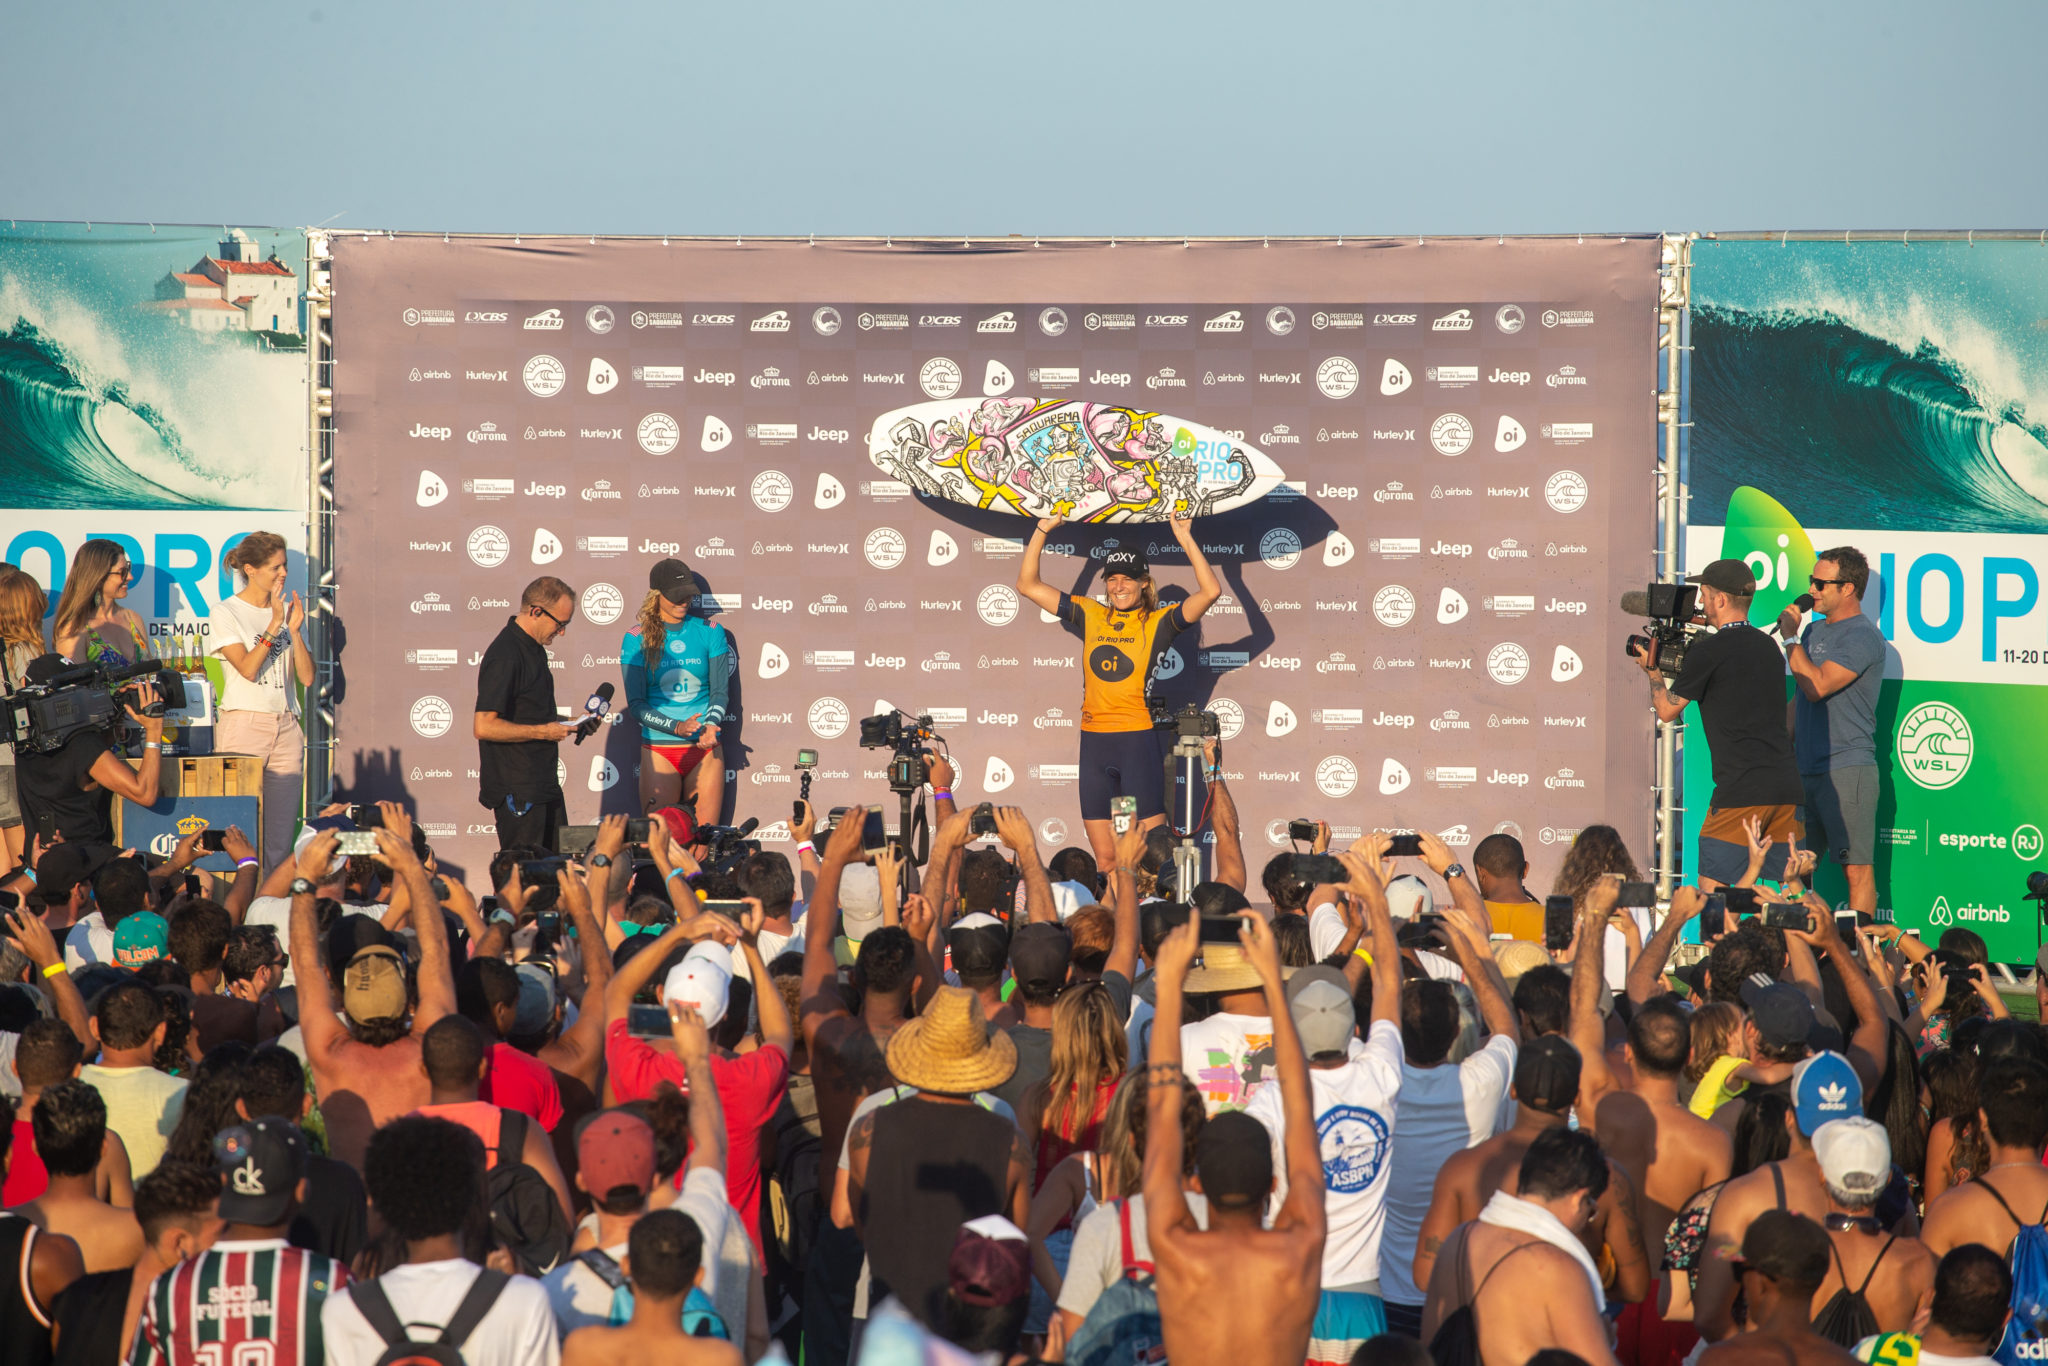 Stephanie Gilmore is the 2018 Oi Rio Pro Champion. After a spectacular event, the Australian surfer will continue to wear the Yellow Jersey in Bali as she keeps herself on top of the Jeep Leaderboard after defeating Lakey Peterson in the Final of the Oi Rio Pro in Saquarema, Rio de Janeiro, BRA.